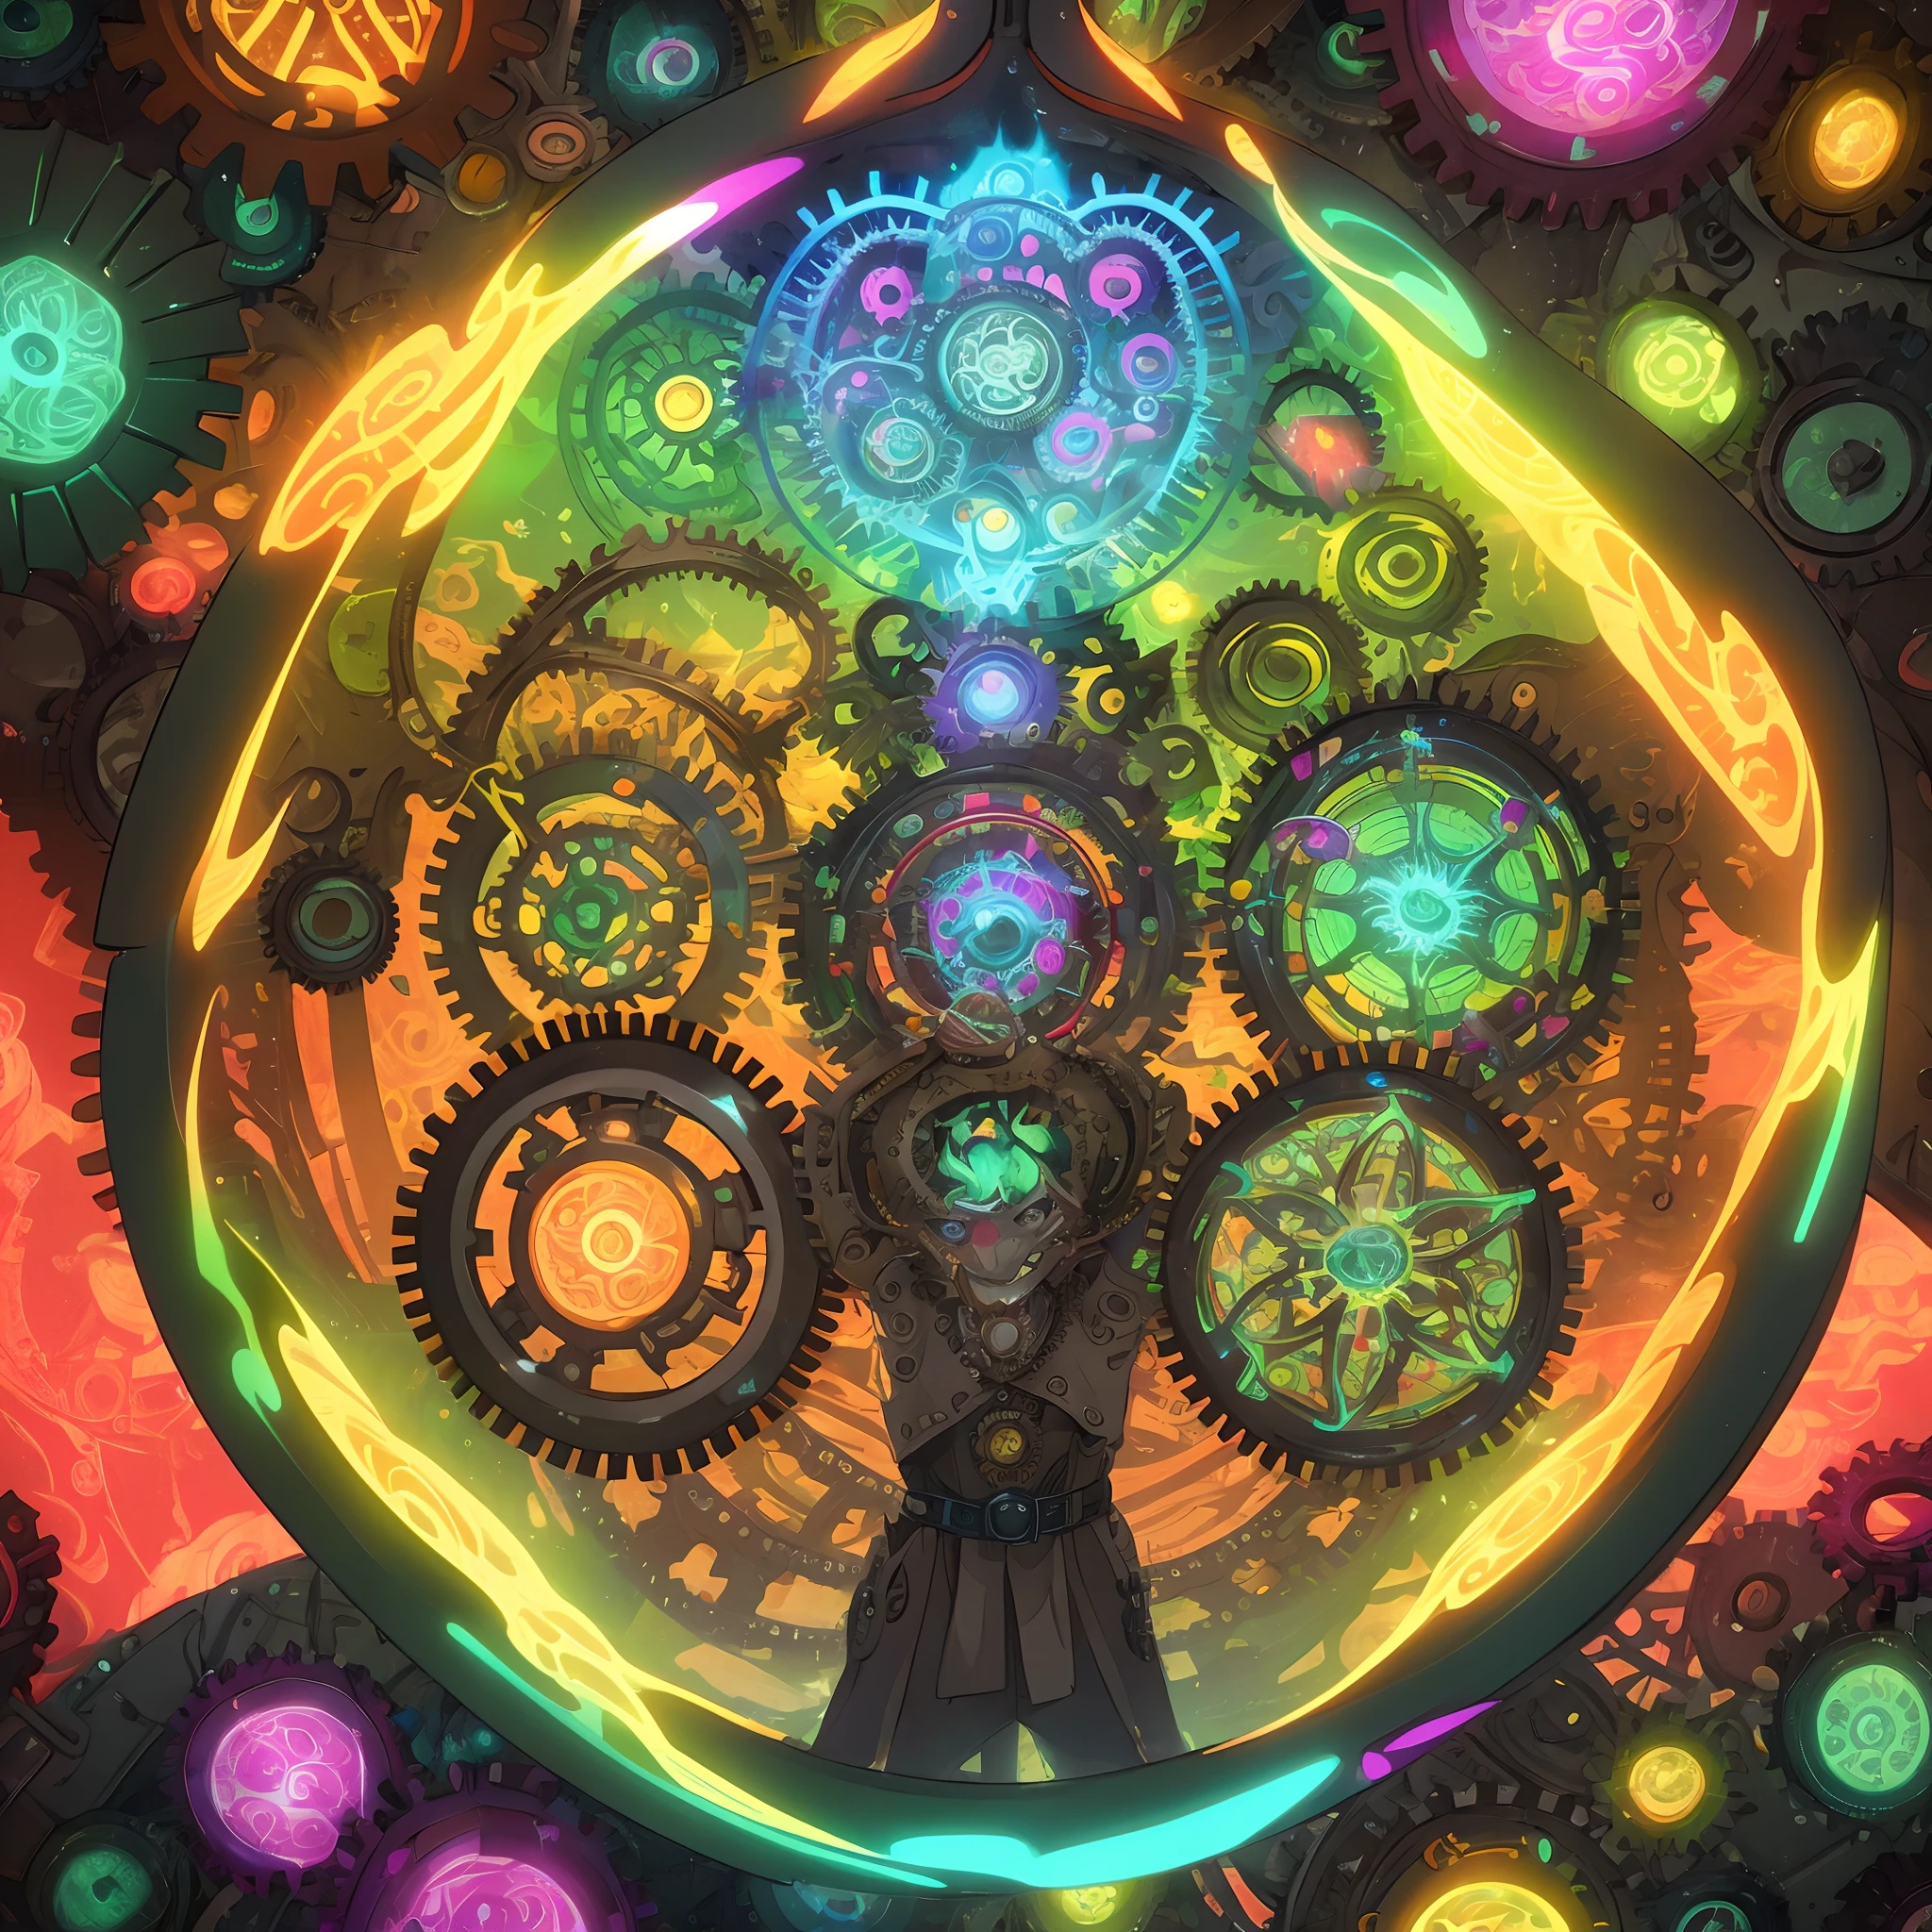 Create a vivid and detailed description of a psychedelic mechanical elf with intricate, iridescent gears and cogs, fluorescent patterns dancing across its metallic surface, and eyes that radiate a mesmerizing kaleidoscope of colors. Capture the otherworldly essence and mischievous spirit that Terence McKenna often associated with these entities in his writings.